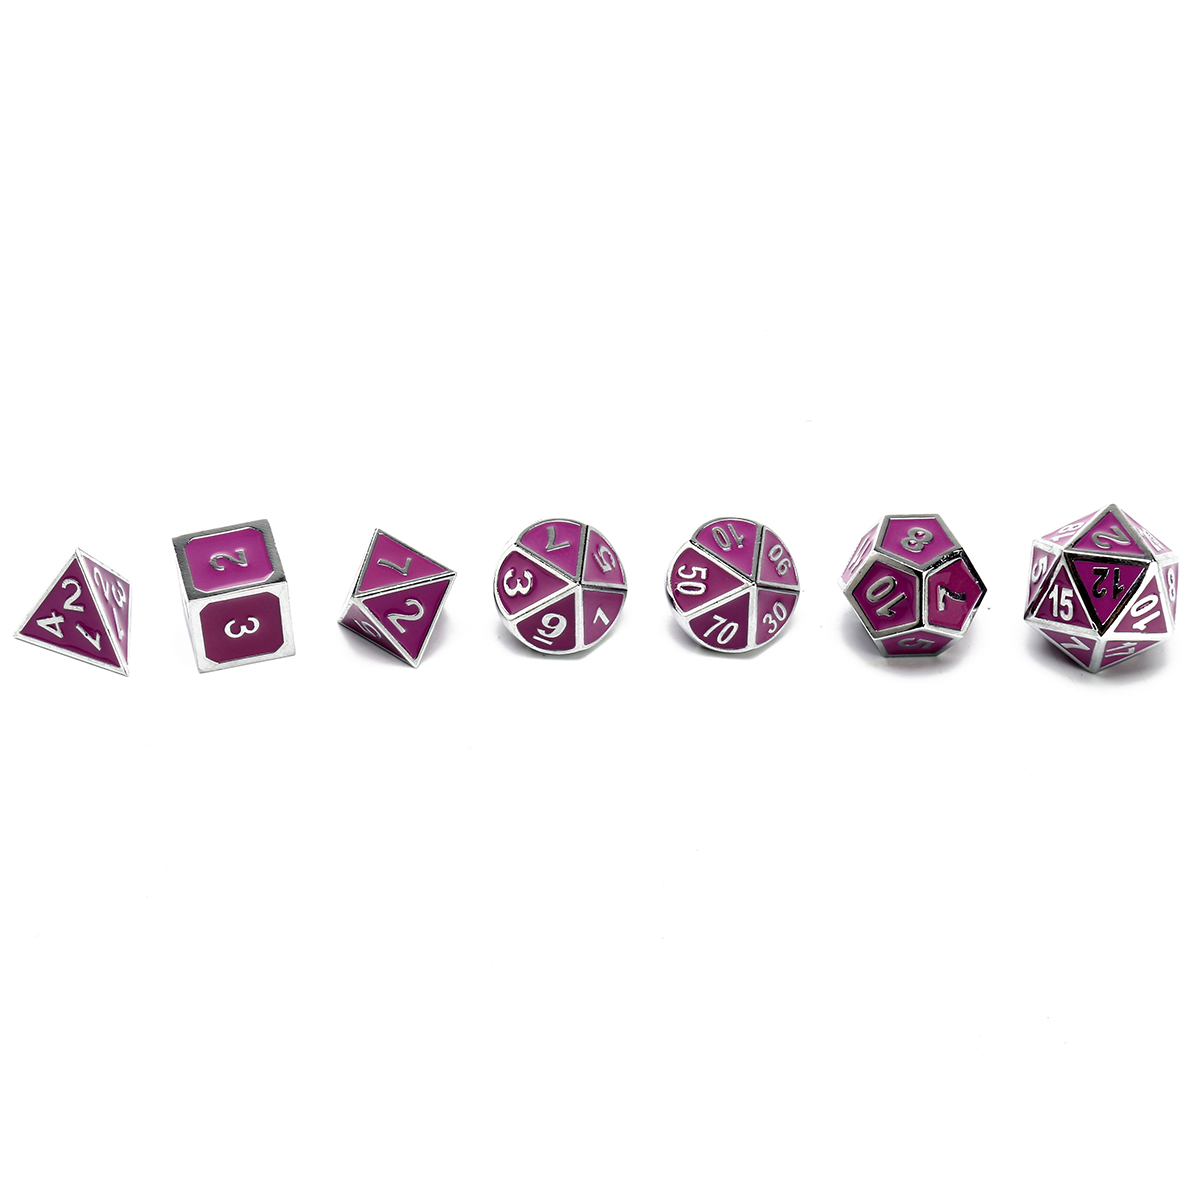 7-Pcs-Multisided-Dice-Heavy-Metal-Polyhedral-Dice-Set-Role-Playing-Games-Dices-with-Bag-1263009-2